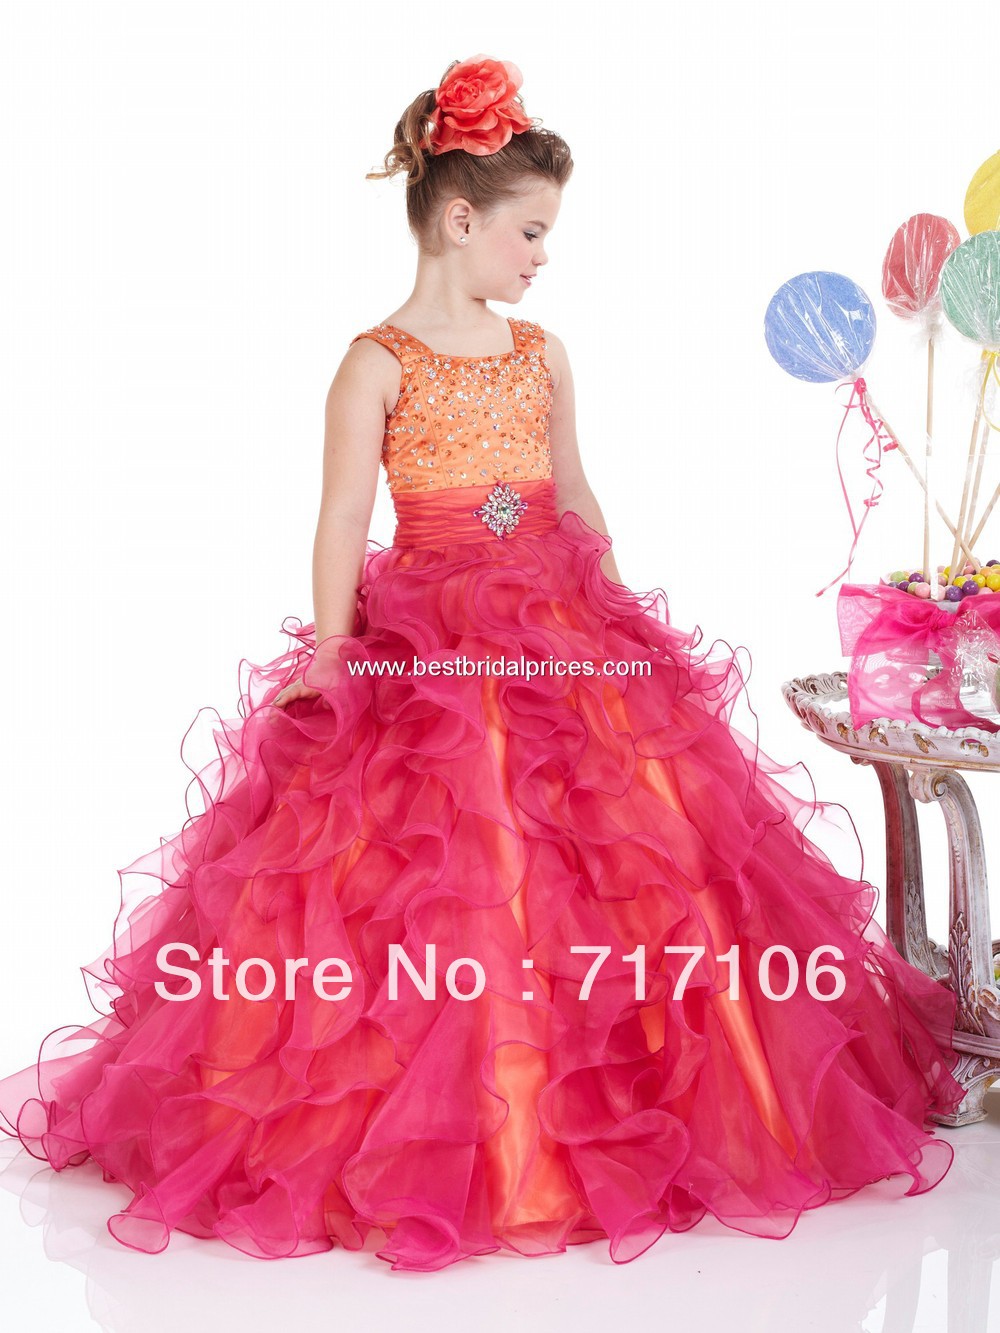 F09 Layers hot sell Free Shipping Fashion New Beaded Organza Lovely Pageant Girl's Party Princess Flower Girl Dresses Gowns